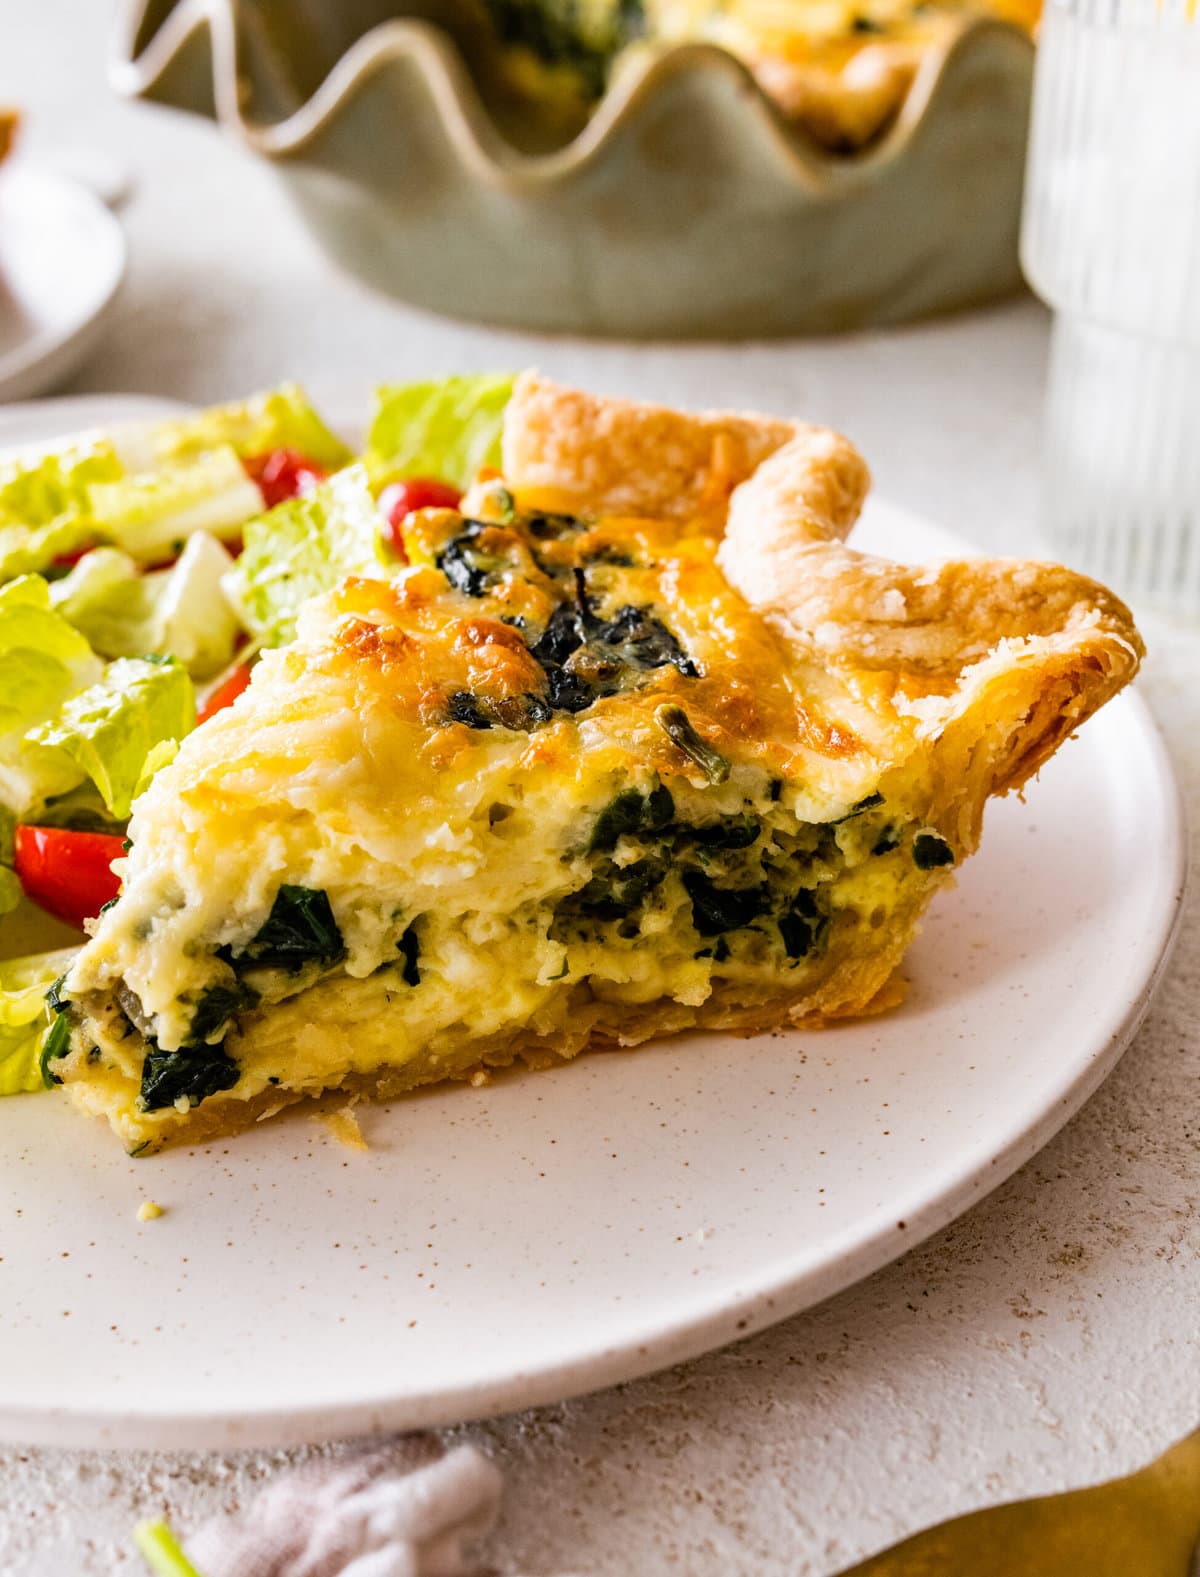 spinach quiche slice on a plate ready to eat.